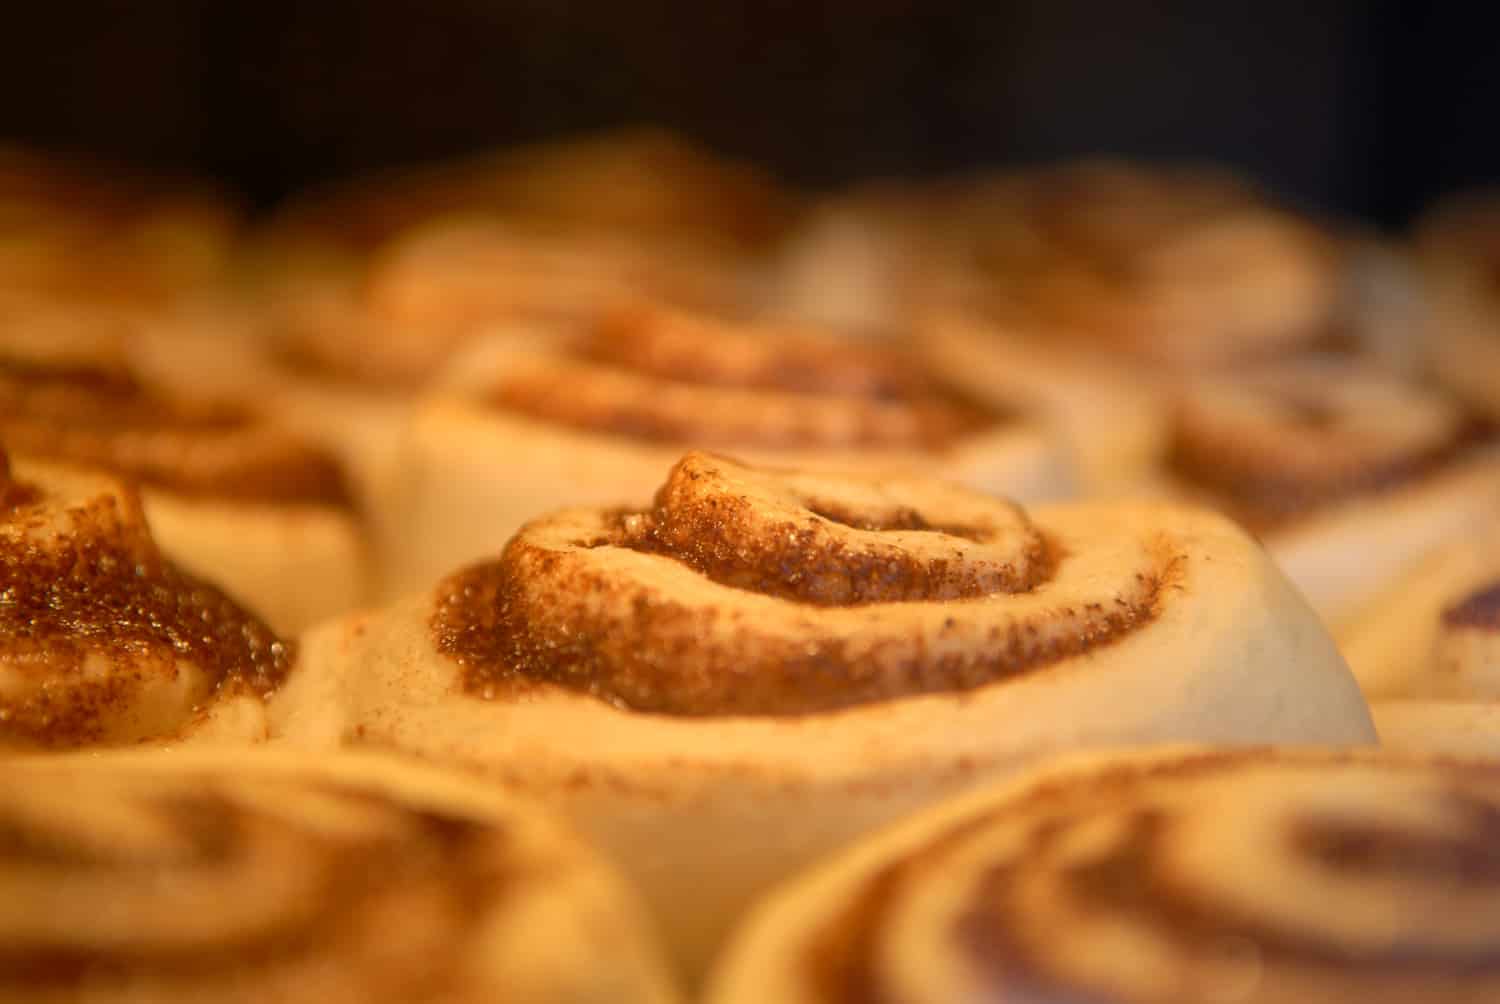 Homemade cinnamon buns baking inside an oven. Some heat radiance from the hot oven can be seen in the image.